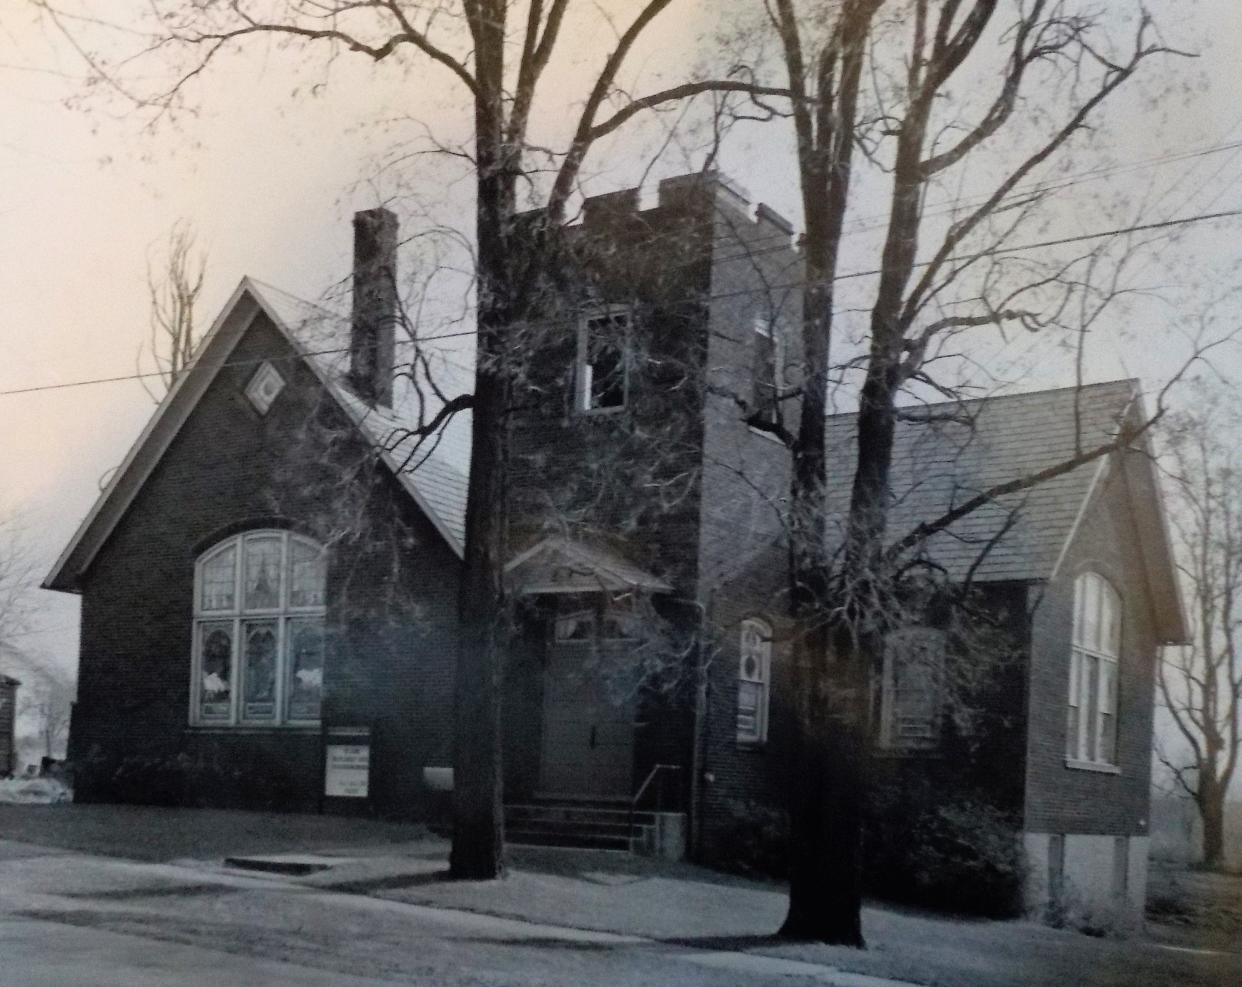 In this 1960s photo, Emmanuel Lutheran Church in North Georgetown was completed with an educational extension and a finished basement fellowship hall.